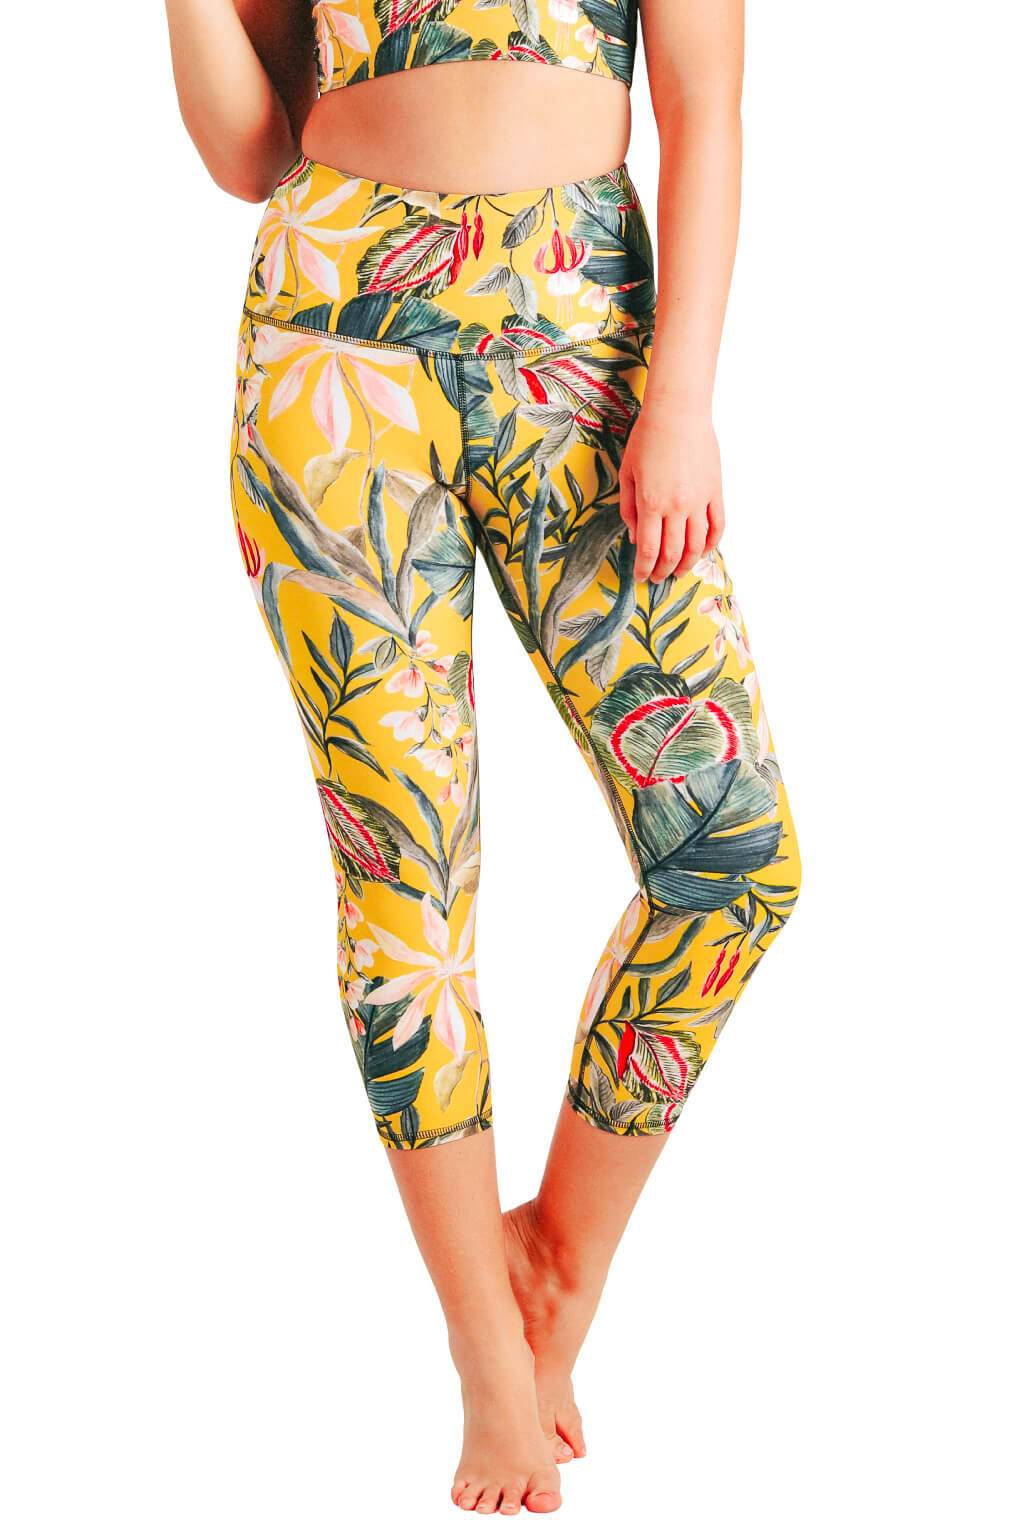 Zyia Active Light N Tight Floral Active Wear Leggings Size Medium Womens New